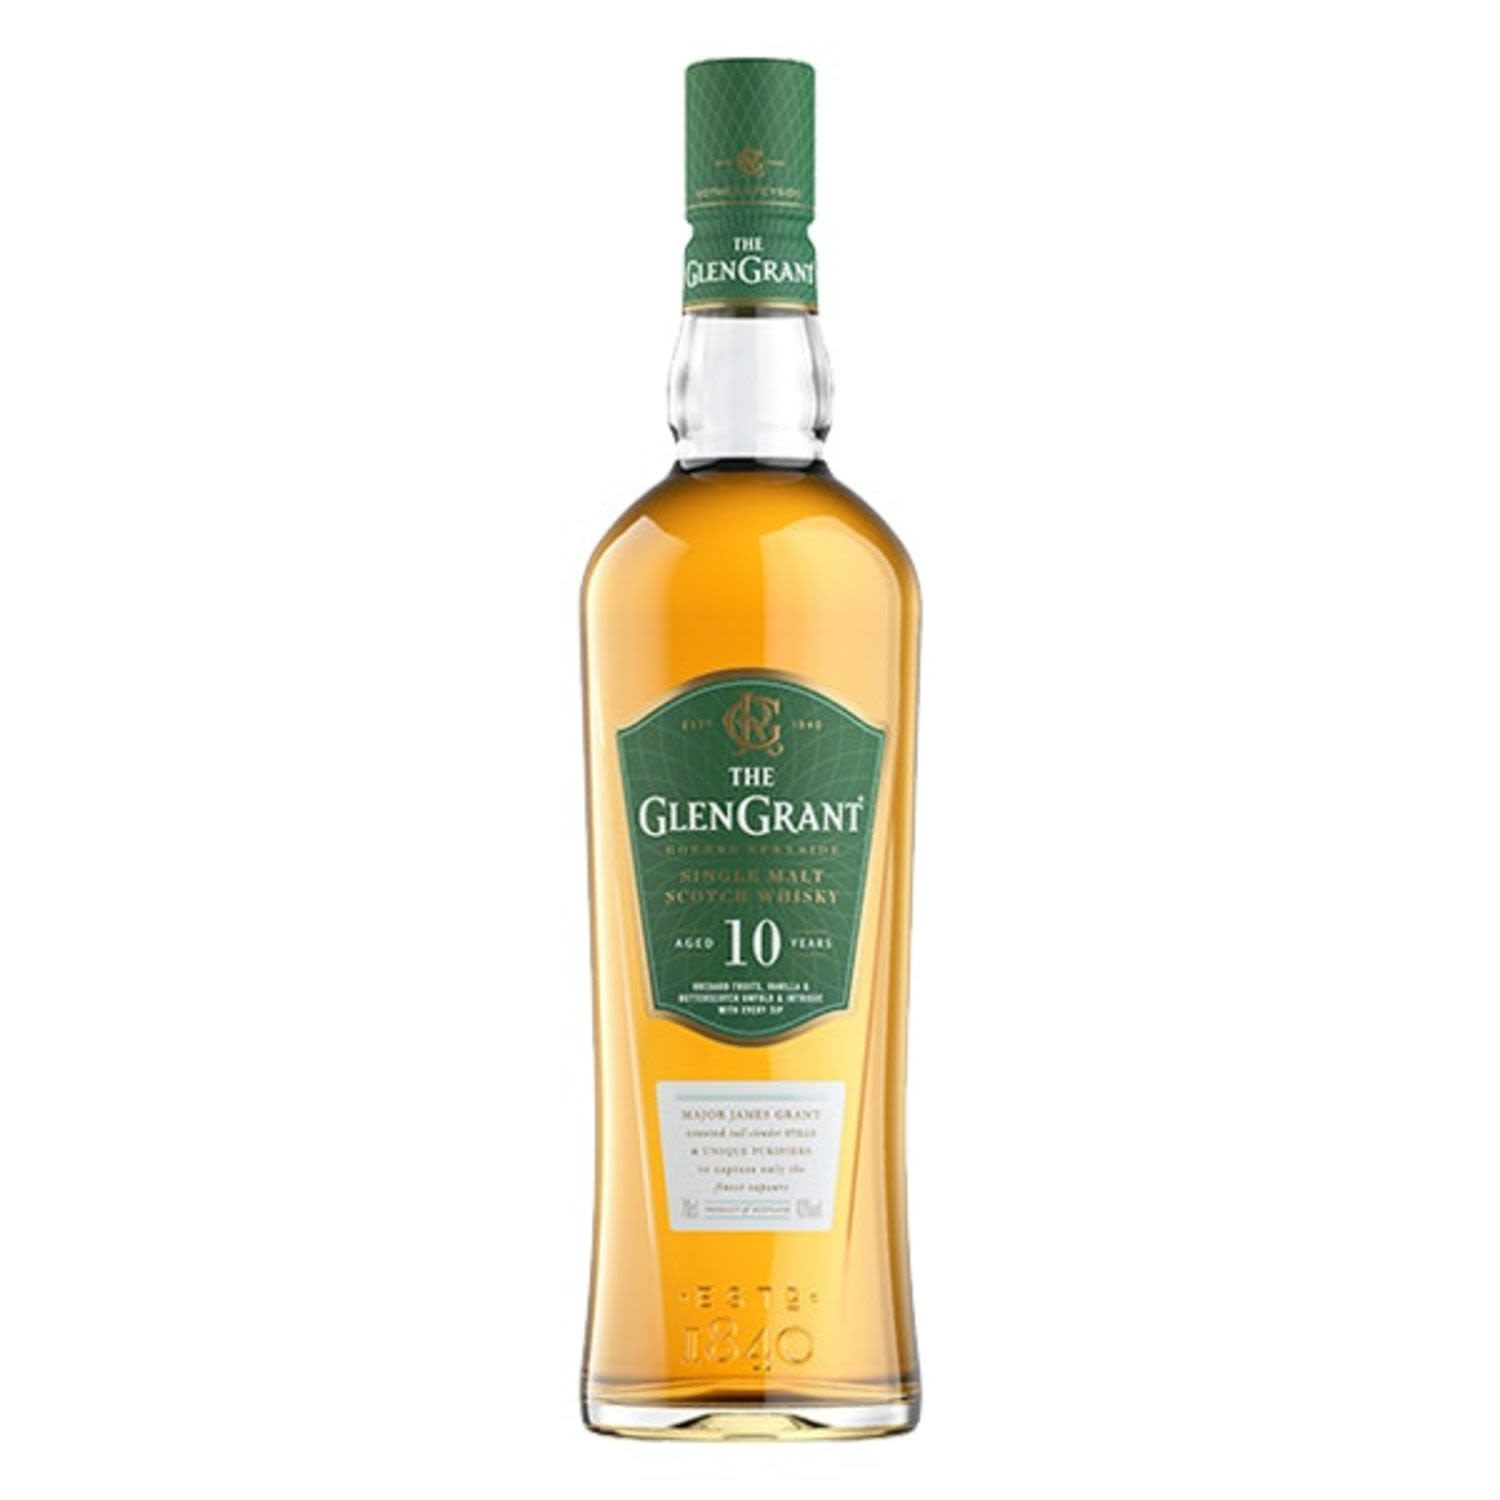 Rich golden barley in colour with a nose which is medium/dry and has a good balance of ripe orchard fruits. The palate is intense and fruity with a long and soft nutty finish. The whisky style is gently, elegant with hints of hazelnut.<br /> <br />Alcohol Volume: 40.00%<br /><br />Pack Format: Bottle<br /><br />Standard Drinks: 23.7</br /><br />Pack Type: Bottle<br /><br />Country of Origin: Scotland<br />